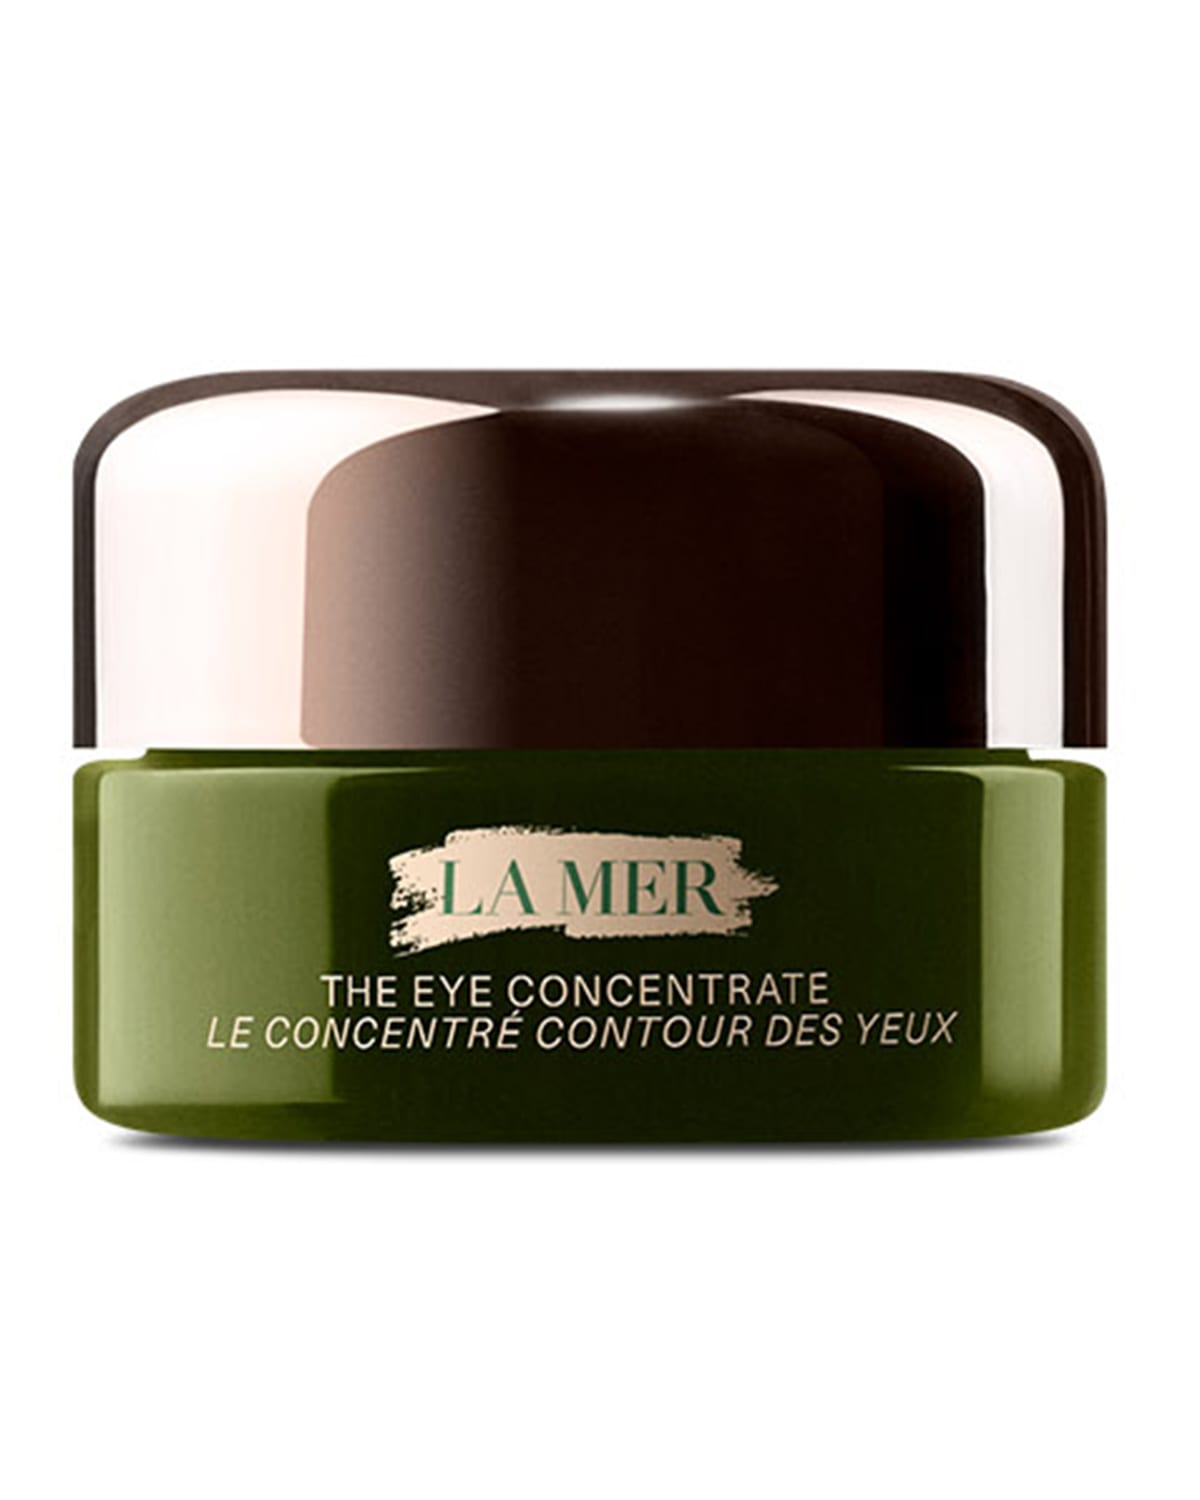 La Mer Yours with any $100 La Mer Purchase